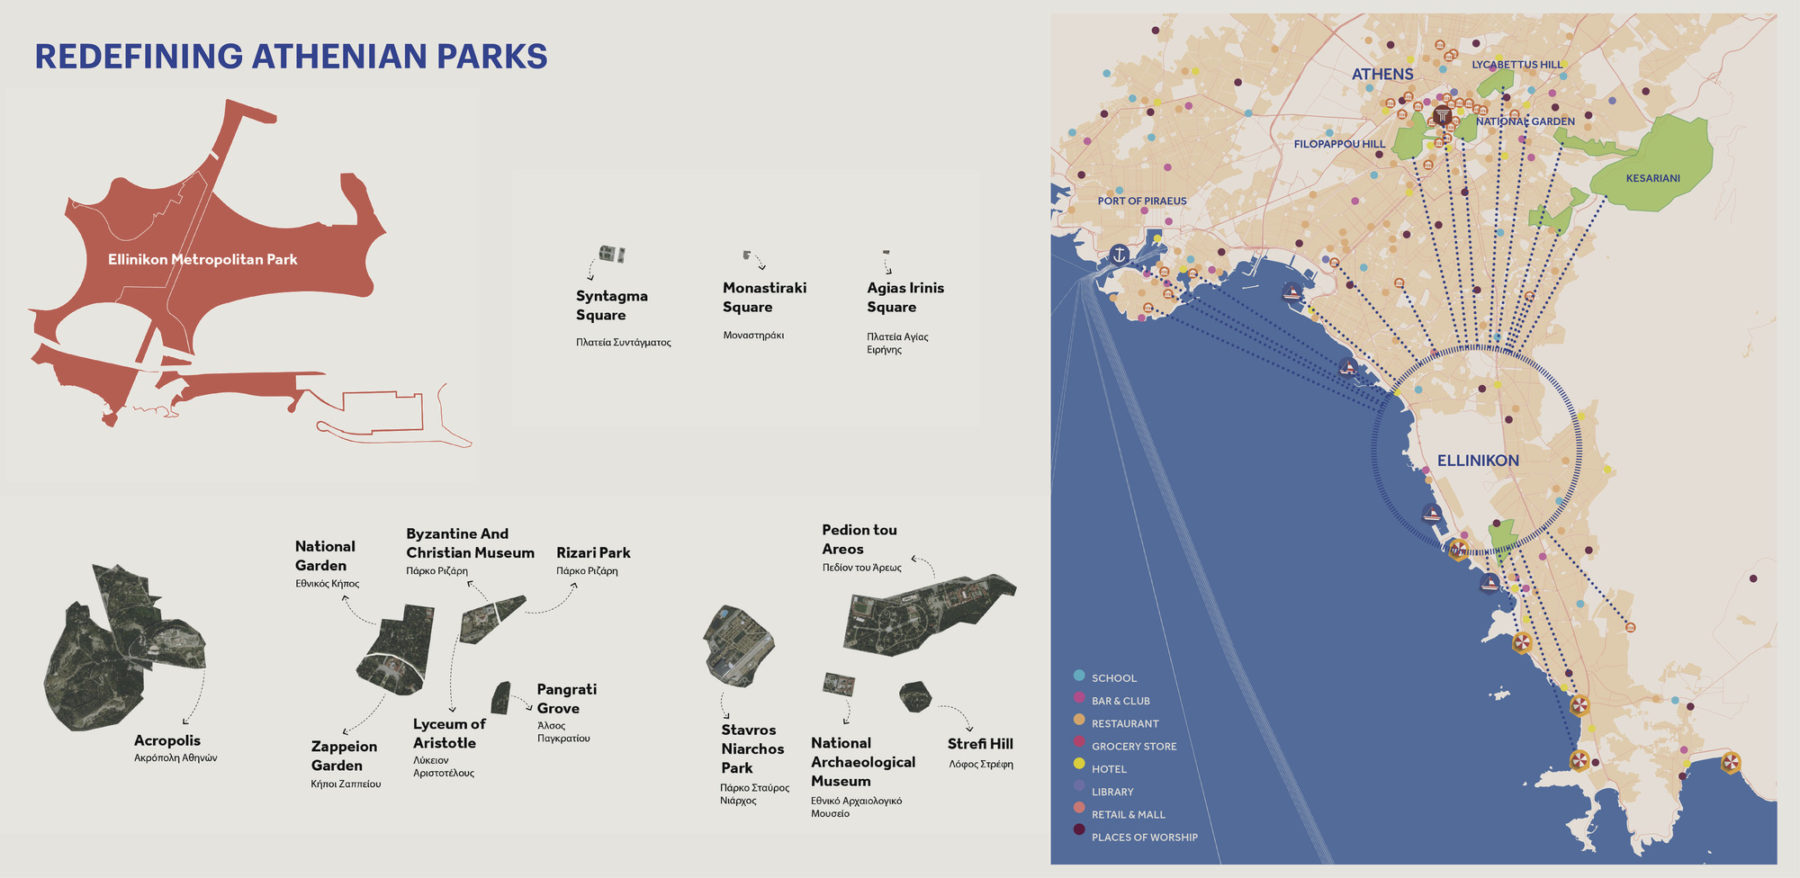 scale comparison diagram between the Ellinikon Metropolitan park and other parks in Greece. Image title reads 